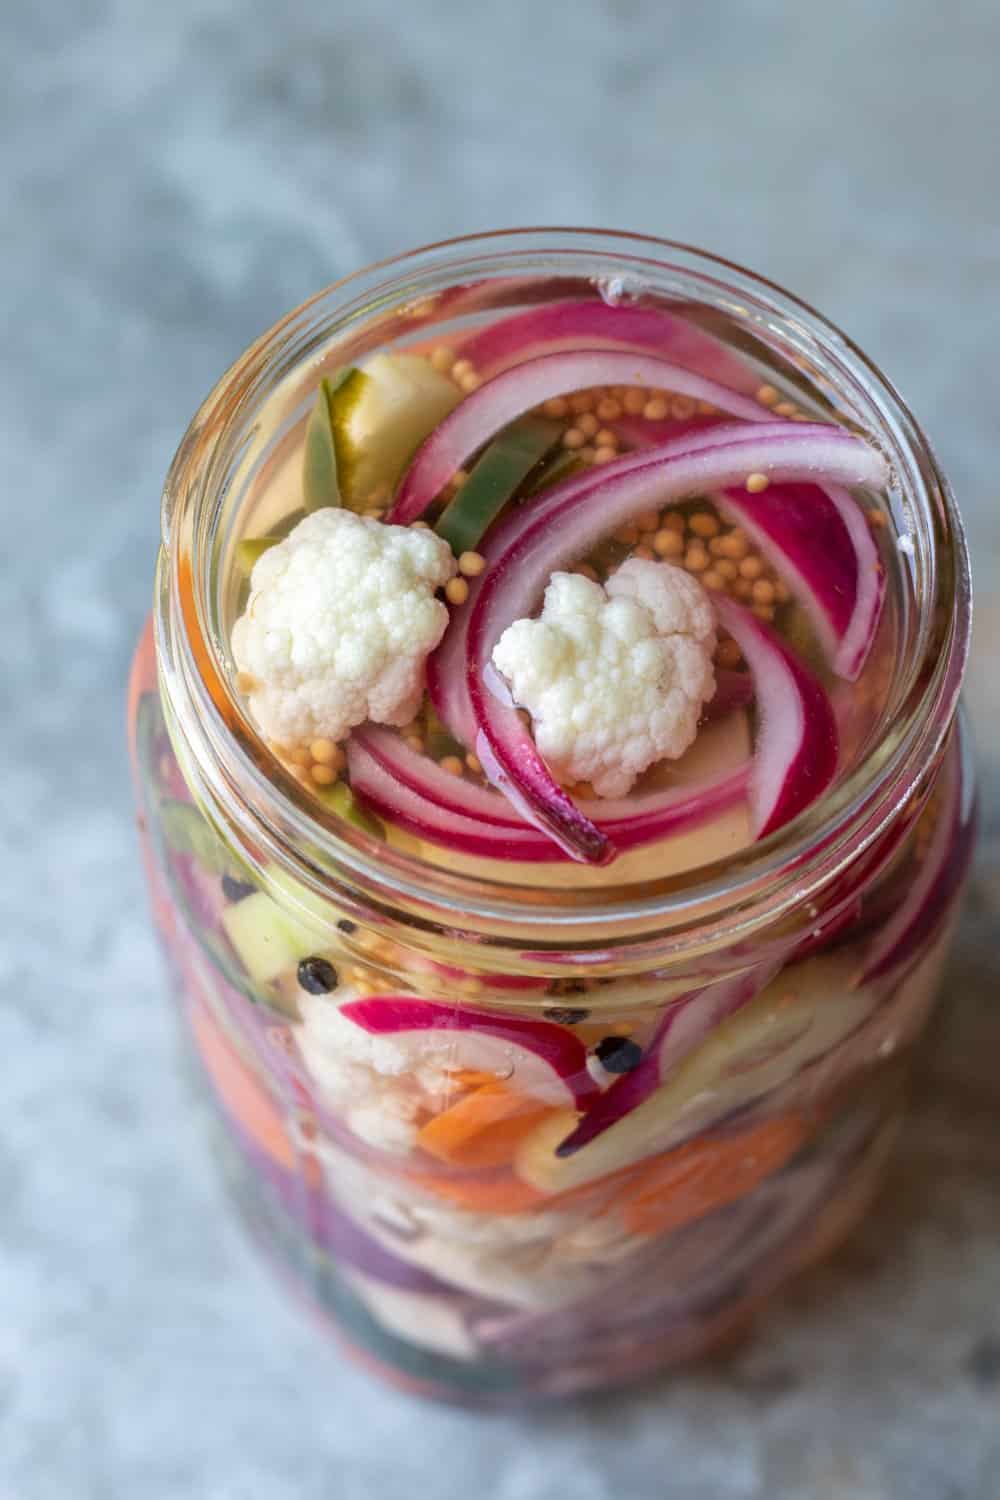 A jar of vegetables with brine poured over, ready to be refrigerated.